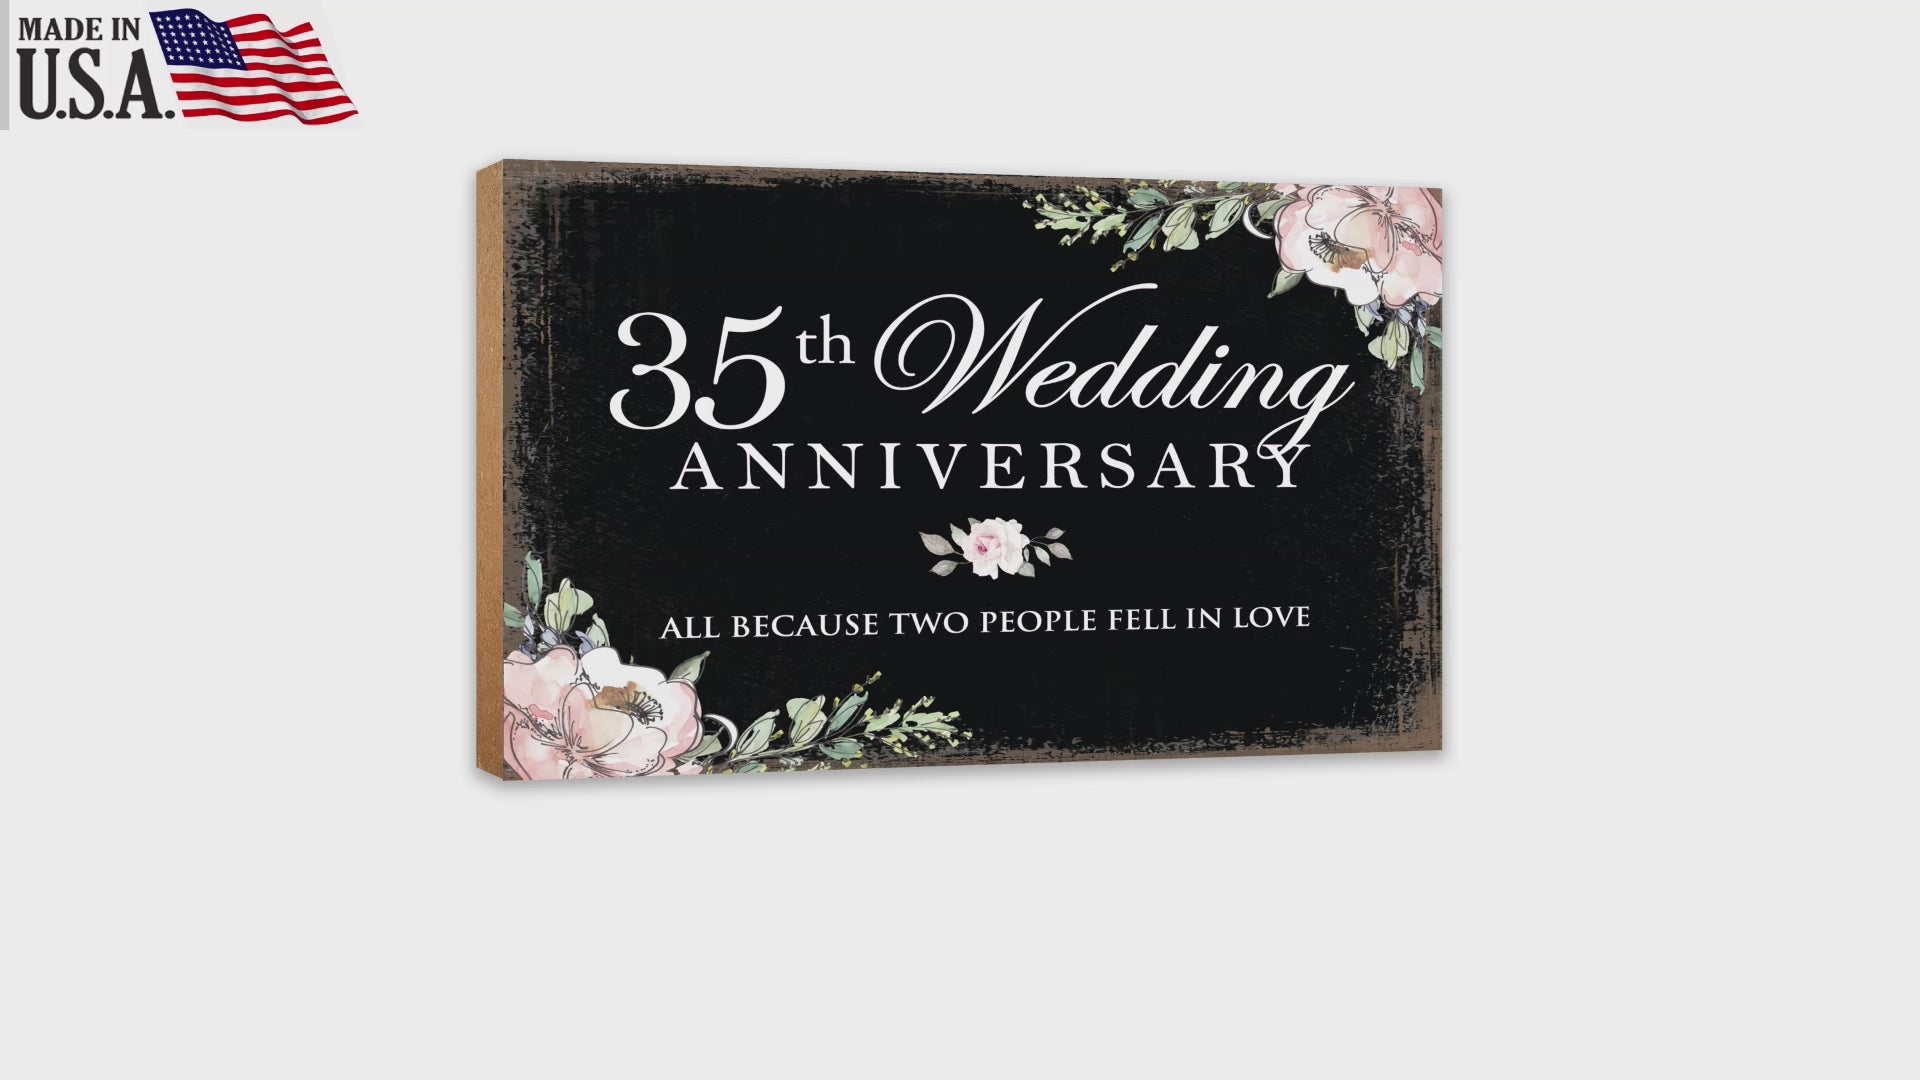 35th Wedding Anniversary Unique Shelf Decor and Tabletop Signs Gift for Couples - Fell in Love